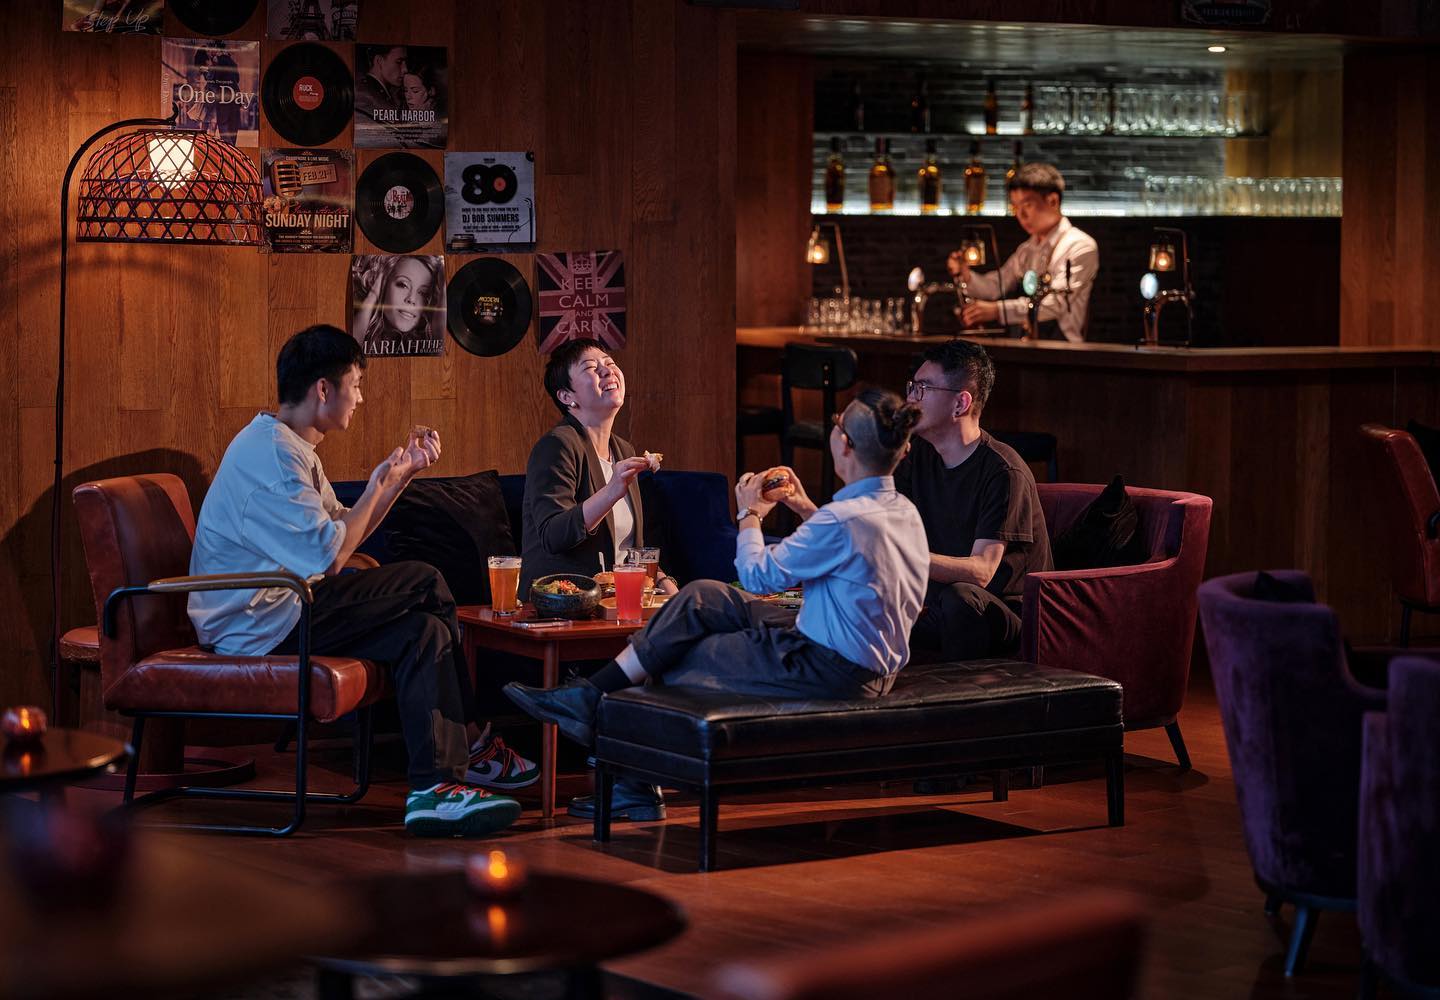 ✨Need a rest at Friday night?

Unwind in the comfortable sofa with friends and listening to a live band performance at Xian. There always have varieties of drinks, pizza or snacks to enjoy all night long.
#EASTBeijing #atEAST #SwireHotels #HappyFriday #Drinkitup